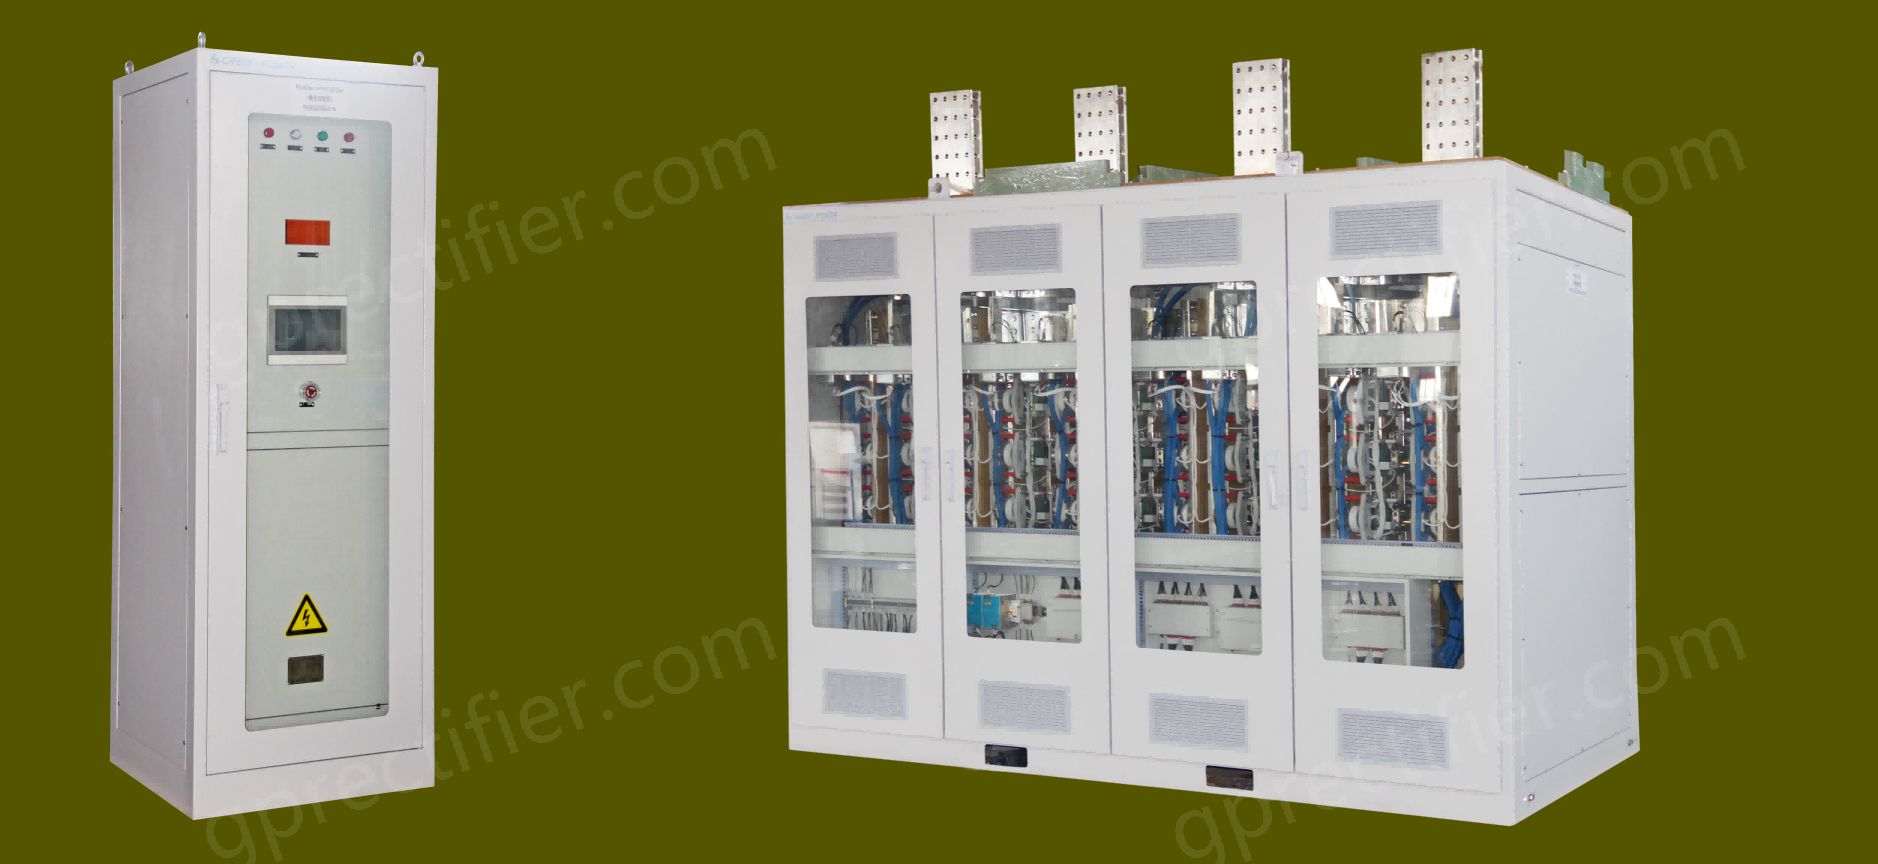 Rectifier and control cabinet